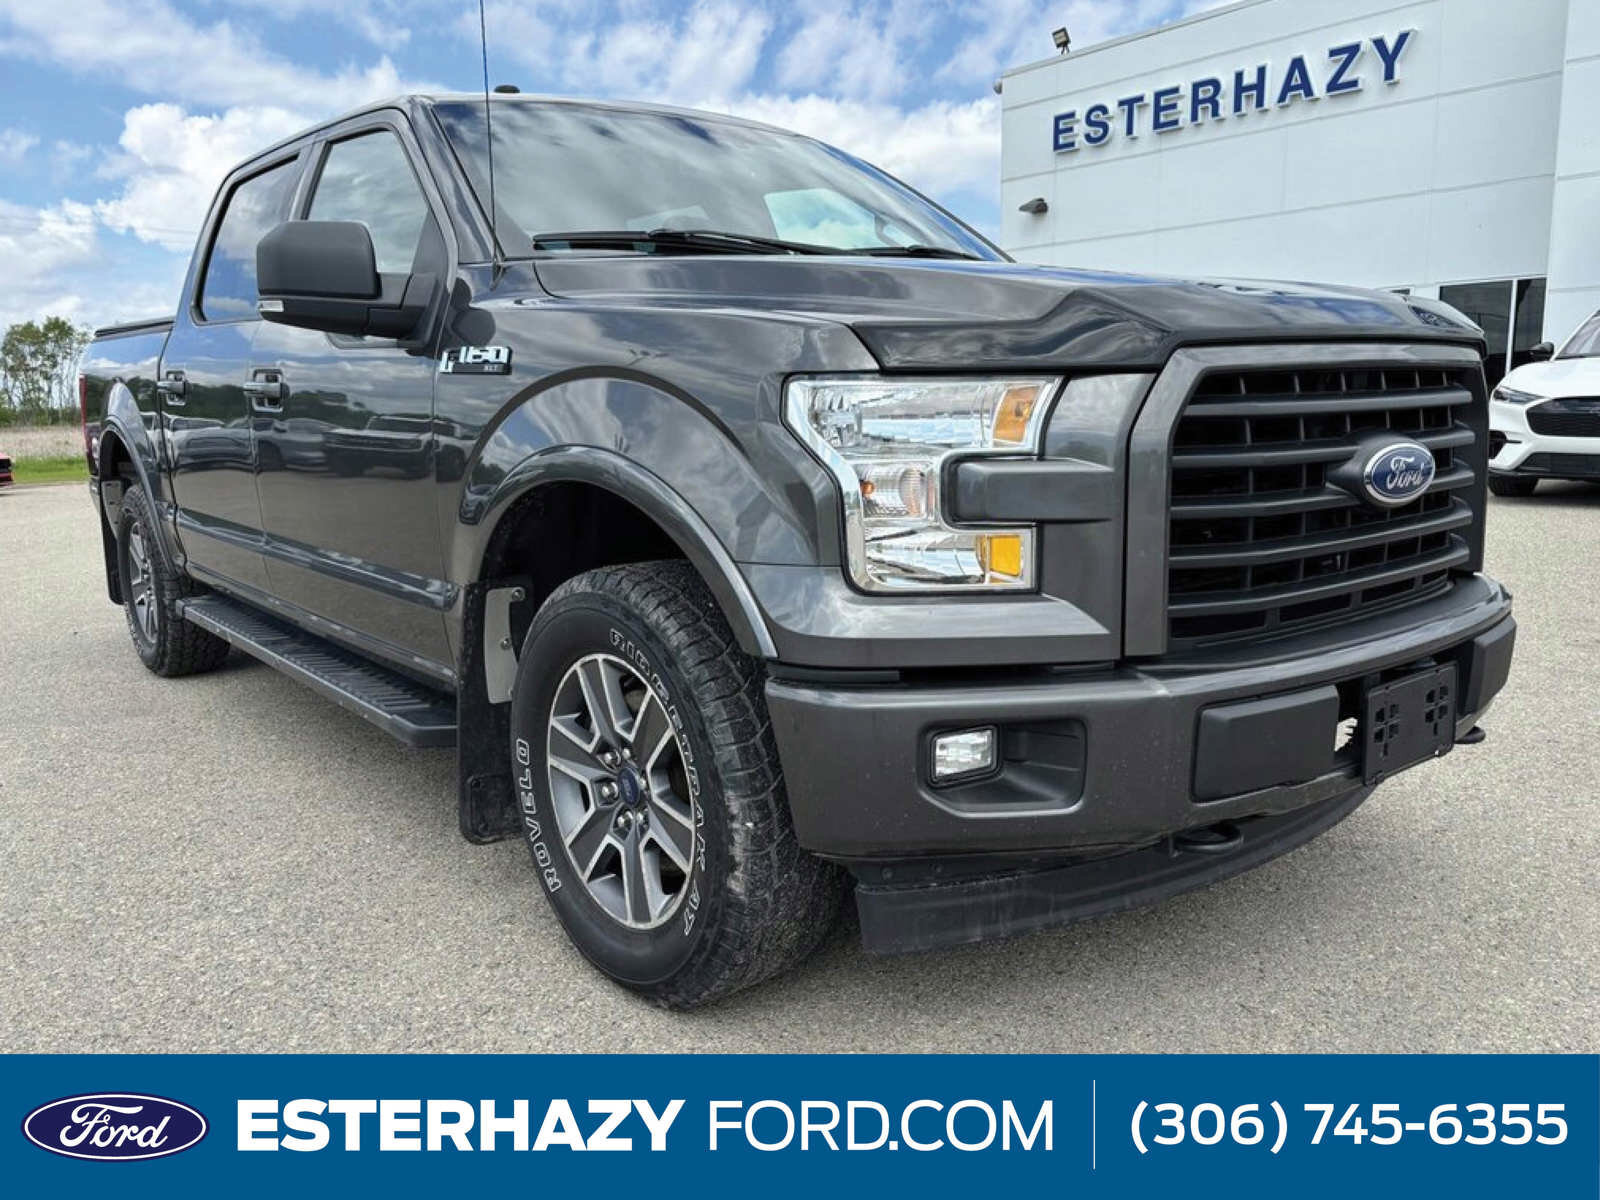 2017 Ford F-150 XLT | HEATED SEATS | NAVIGATION | REMOTE START